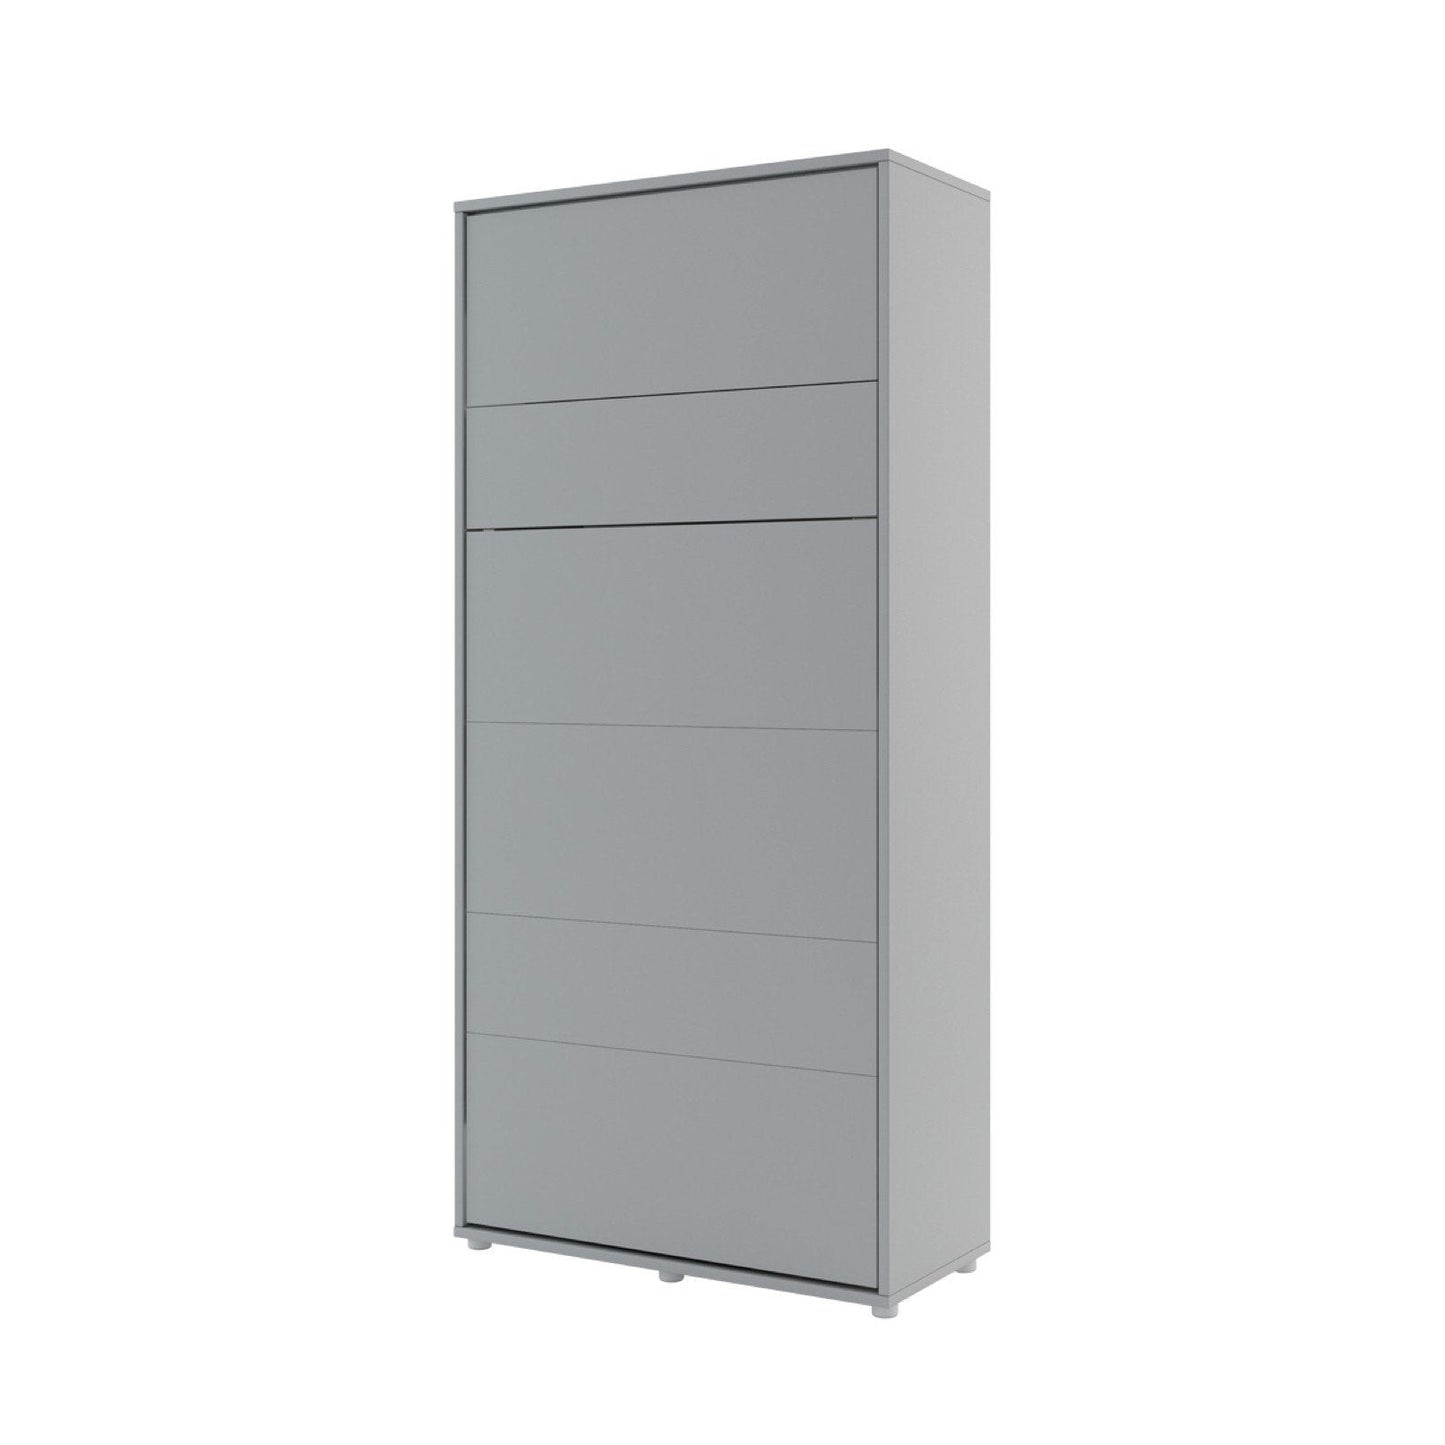 BC-03 Vertical Wall Bed Concept 90cm With Storage Cabinets and LED